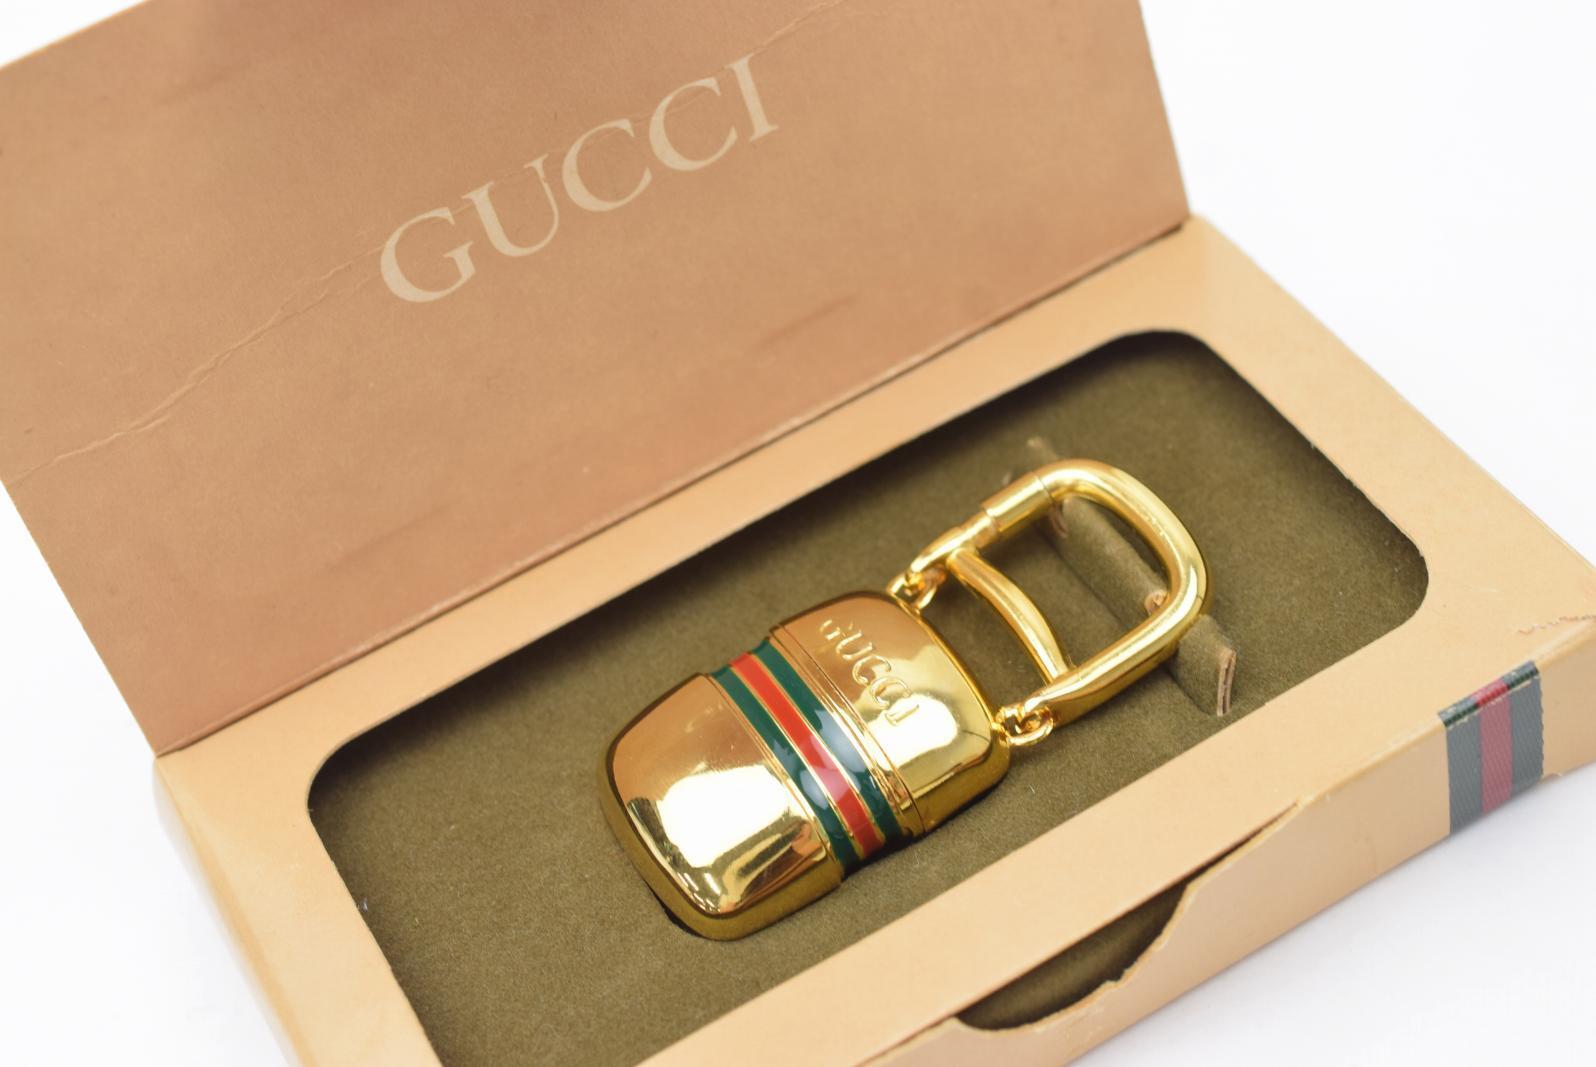 gucci key ring container